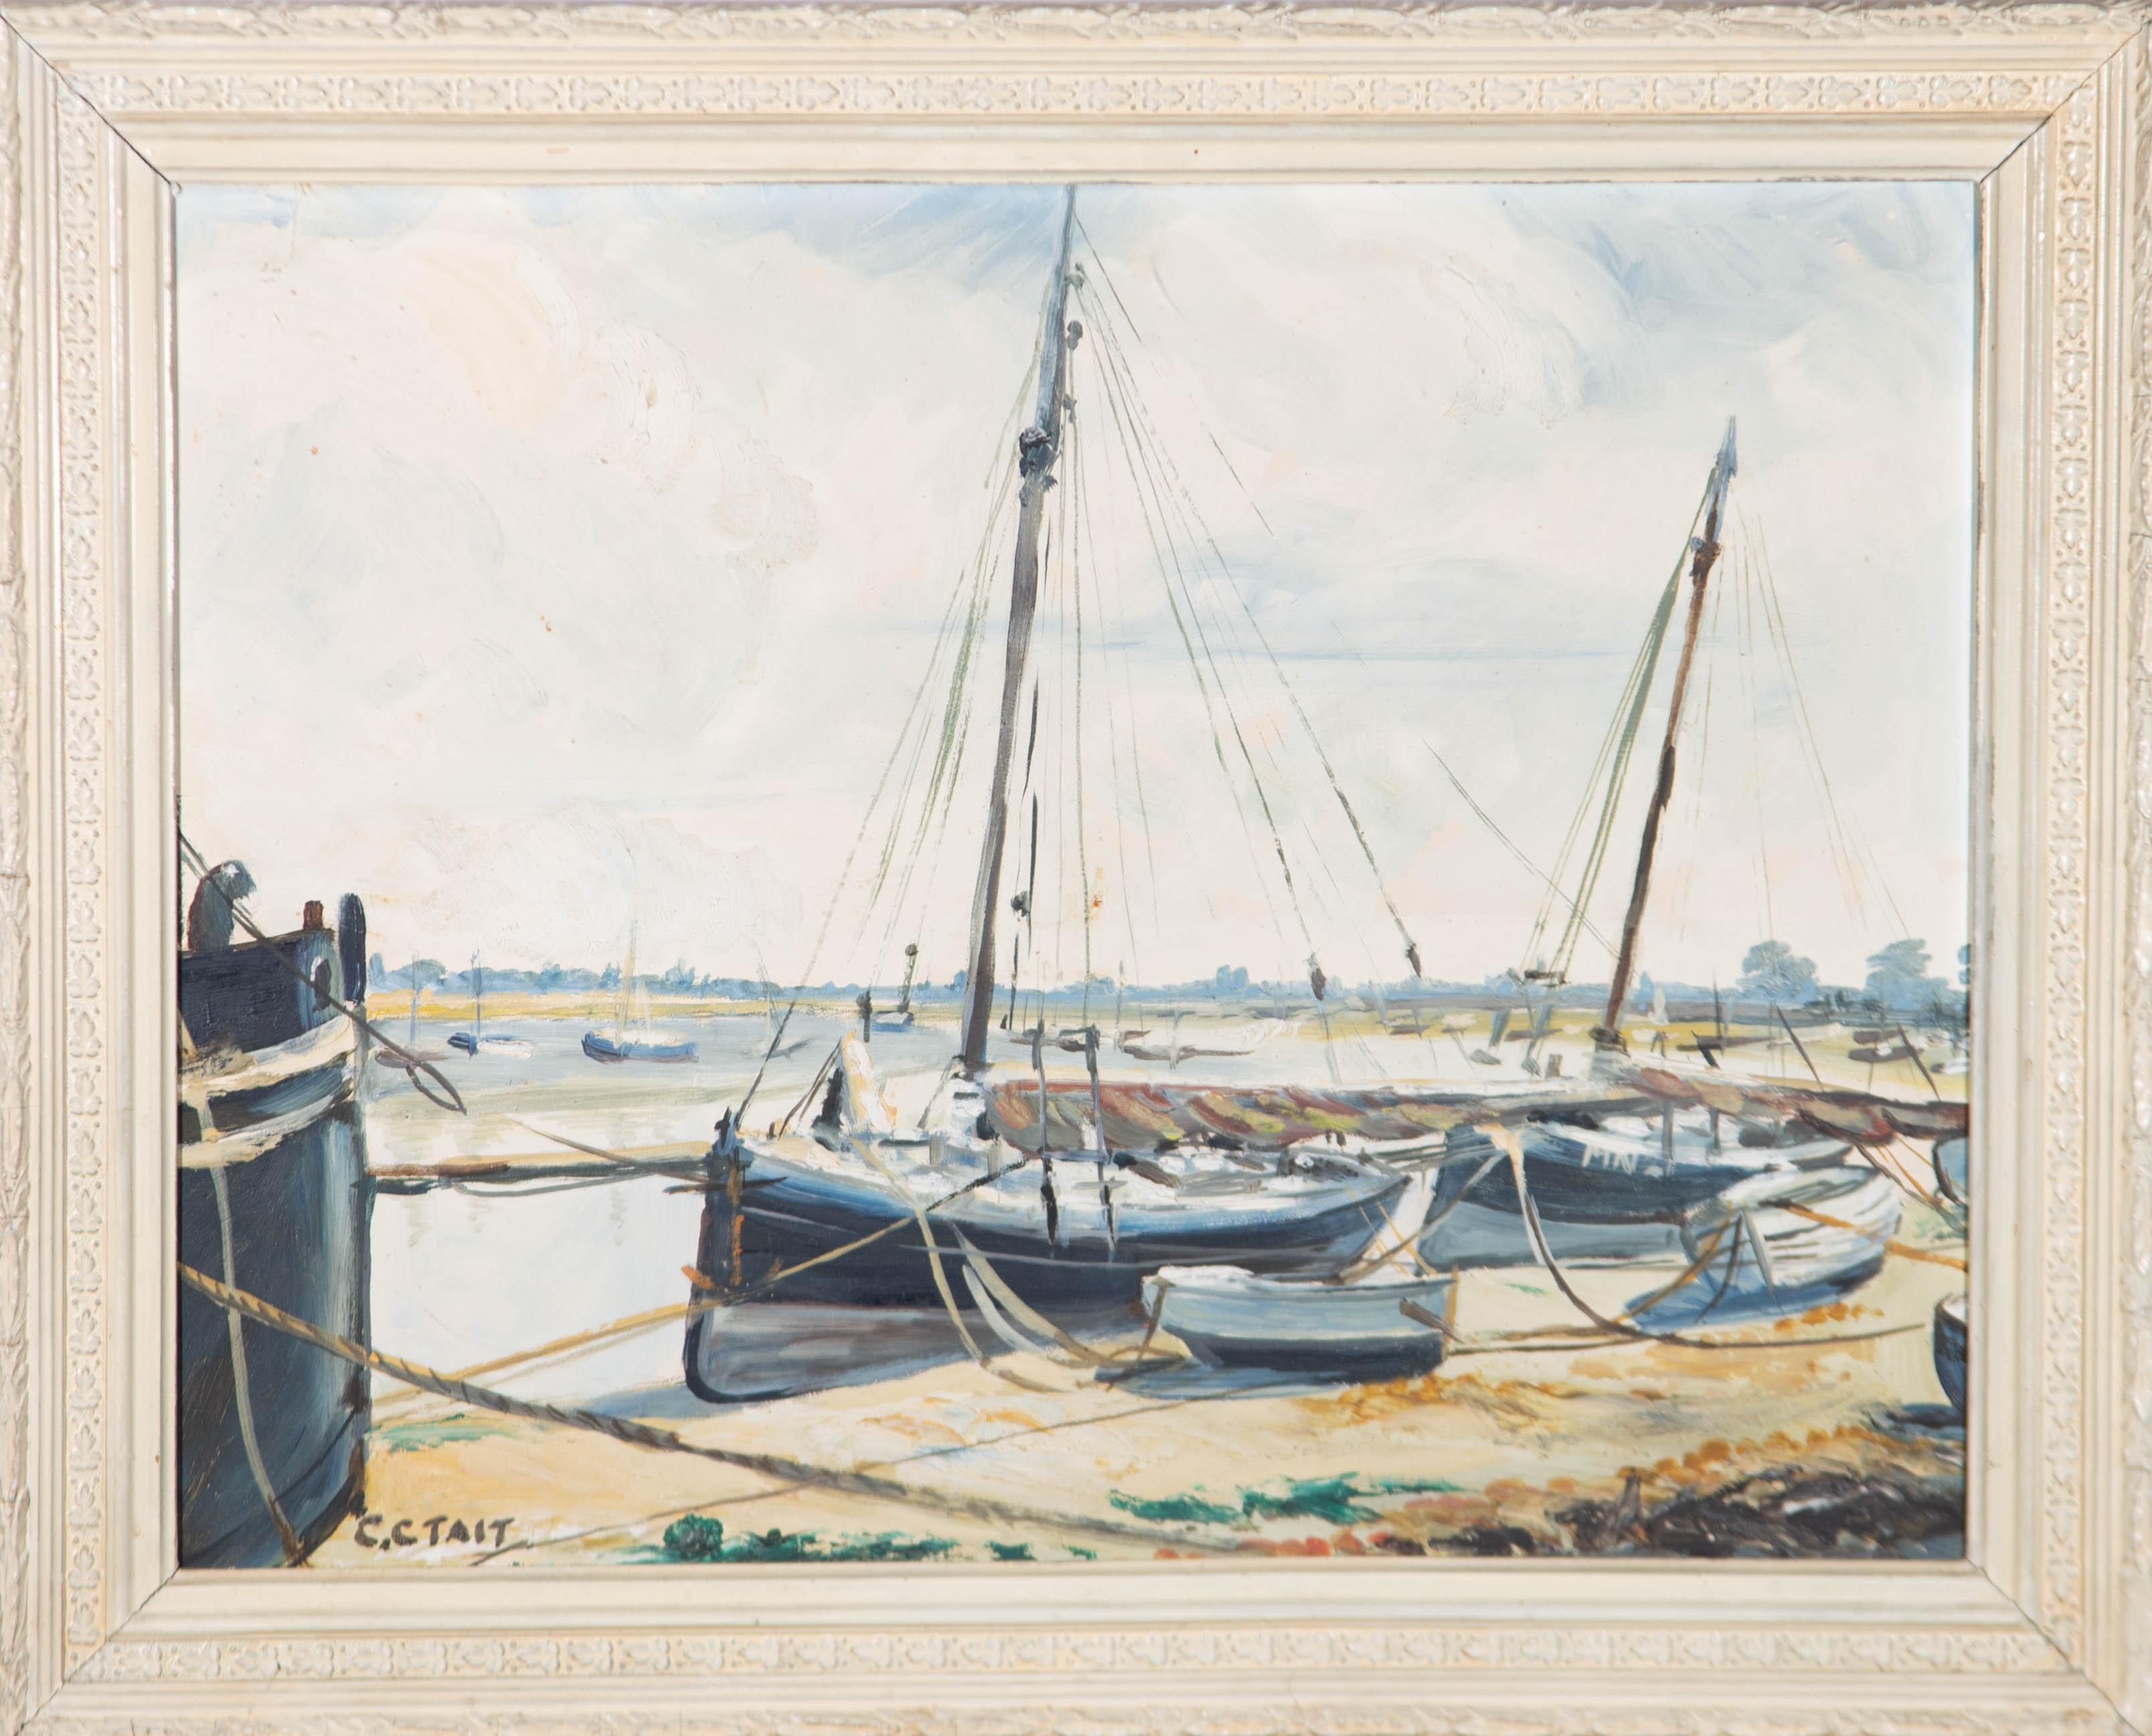 A wonderful coastal view by the artist Charles Grigg Tait. Most likely depicting an area of Maldon where Tait lived for many years. With expressive paintwork and bold use of colour typical of Tait's style. Well presented in a painted white frame